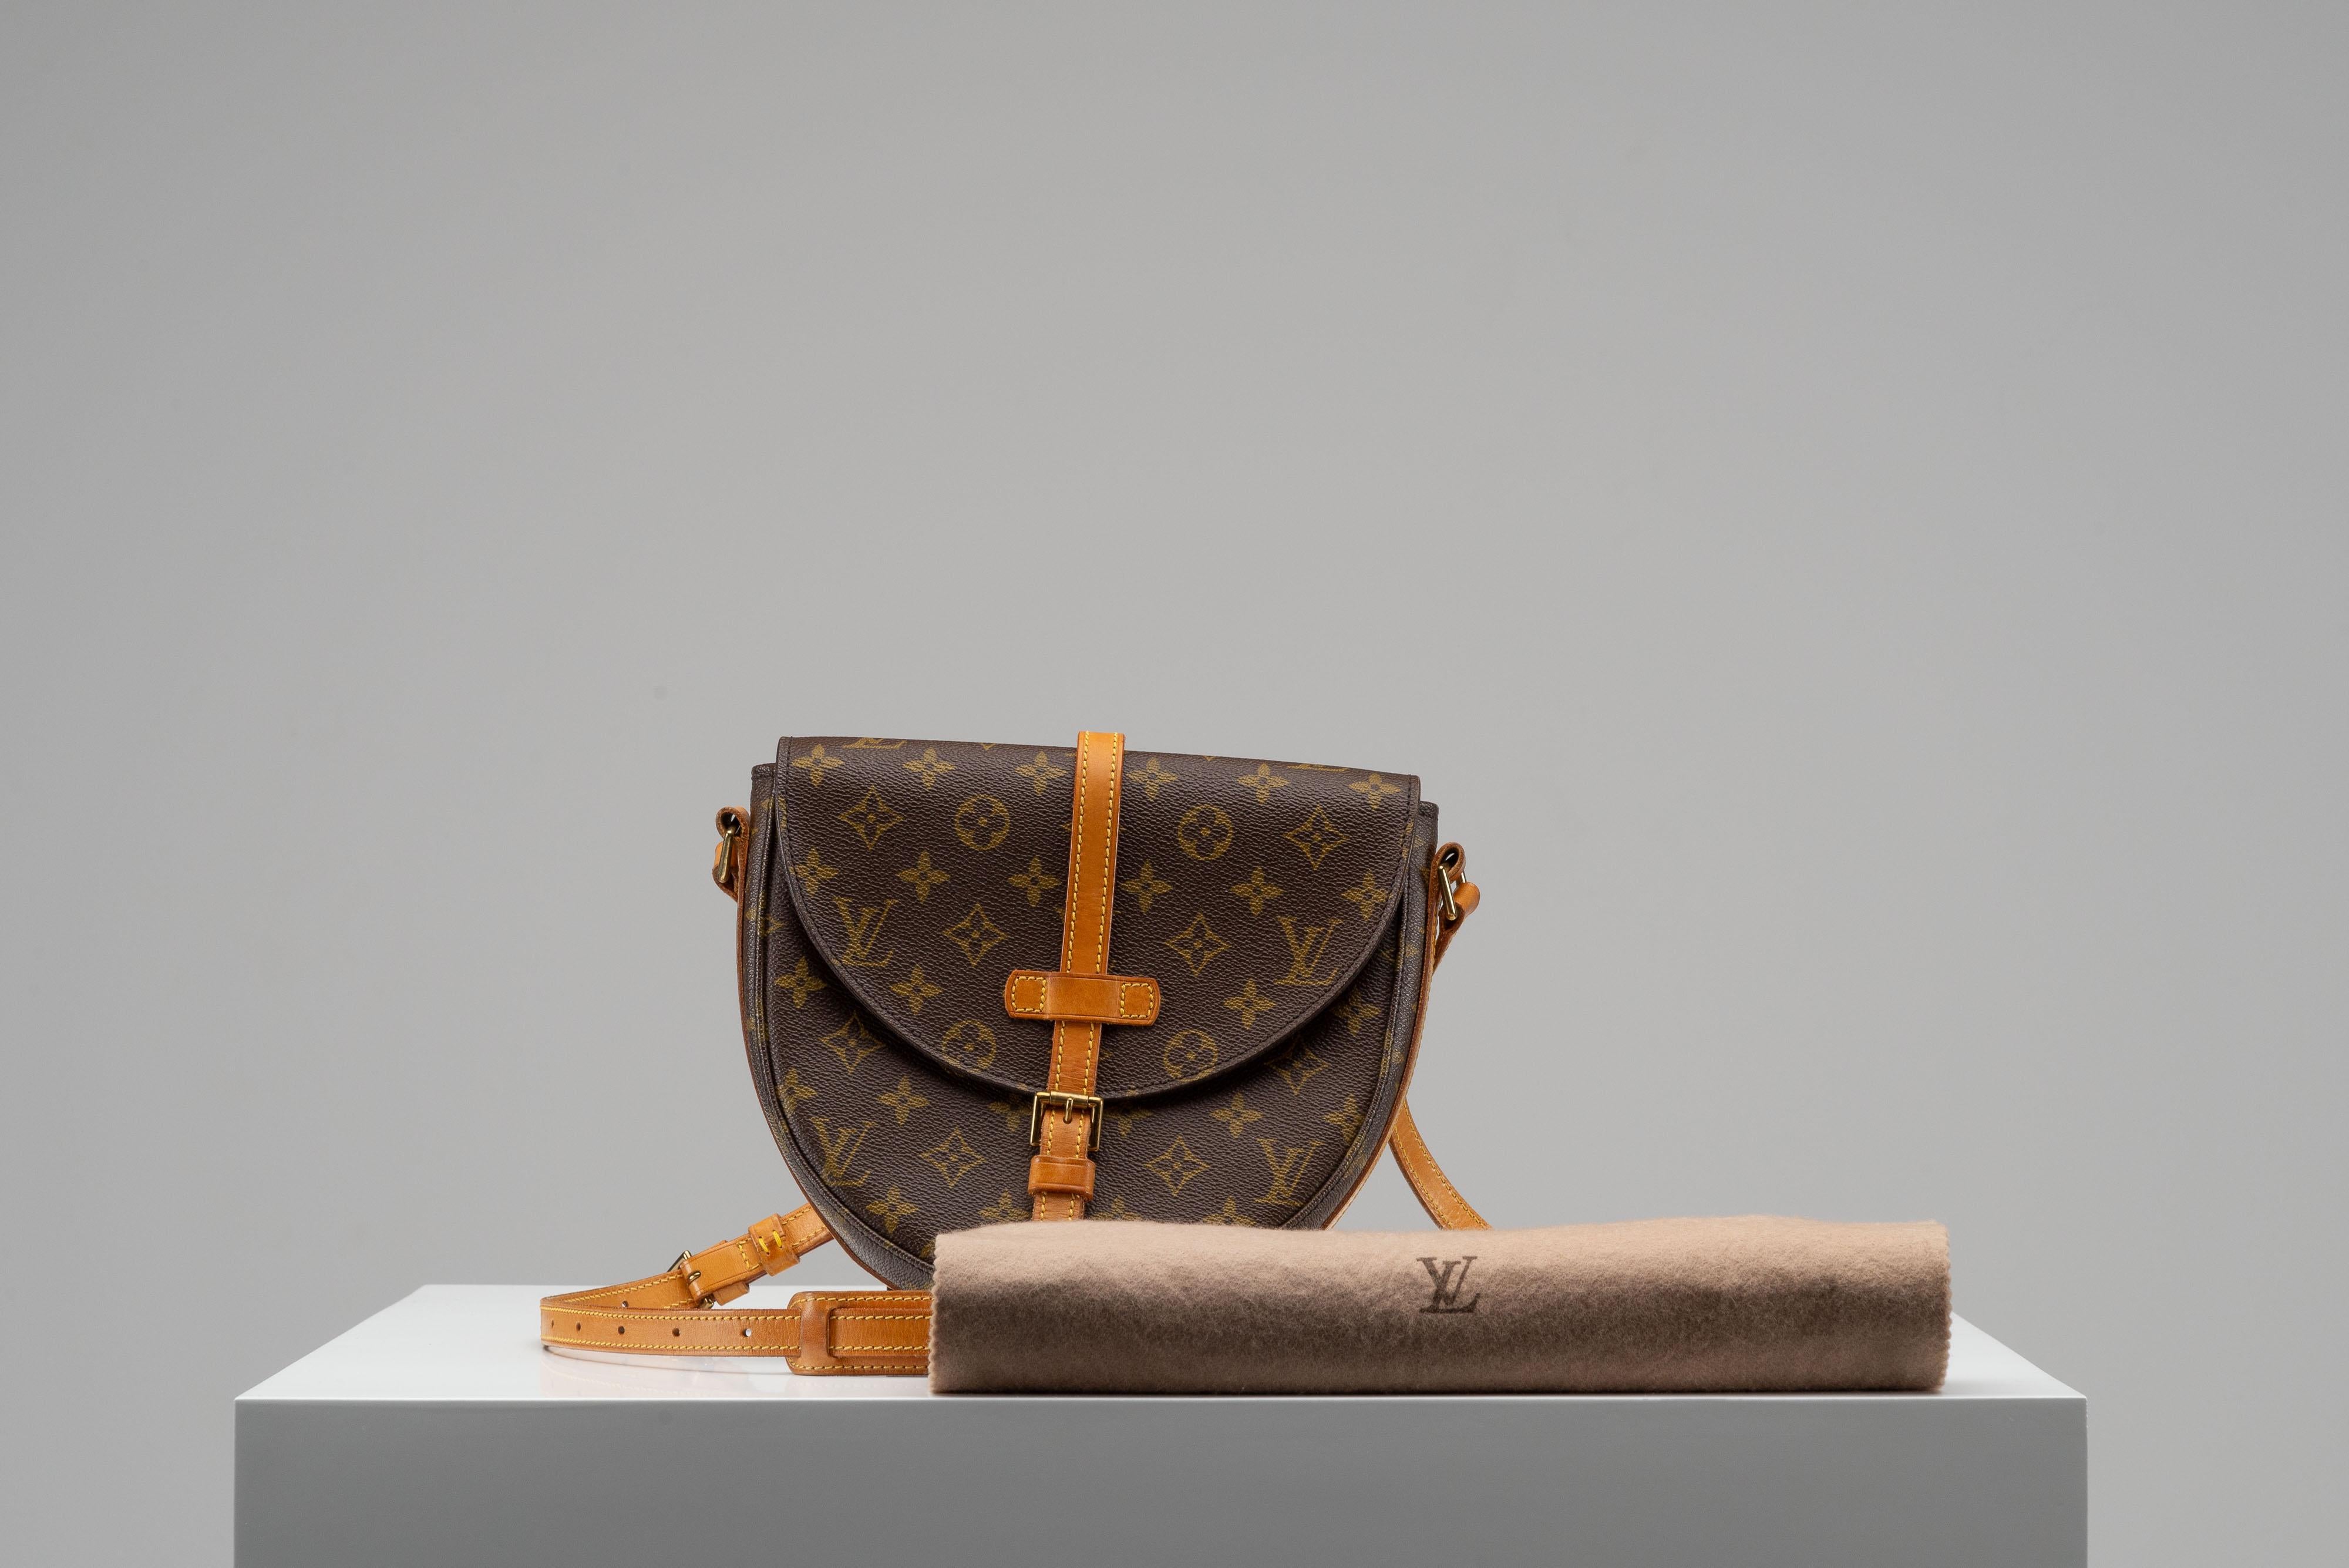 From the collection of SAVINETI we offer this Louis Vuitton Chantilly:
-    Brand: Louis Vuitton
-    Model: Chantilly
-    Condition: Very Good Condition
-    Materials: monogram canvas
-    Extras: Dustbag

Authenticity is our core value at